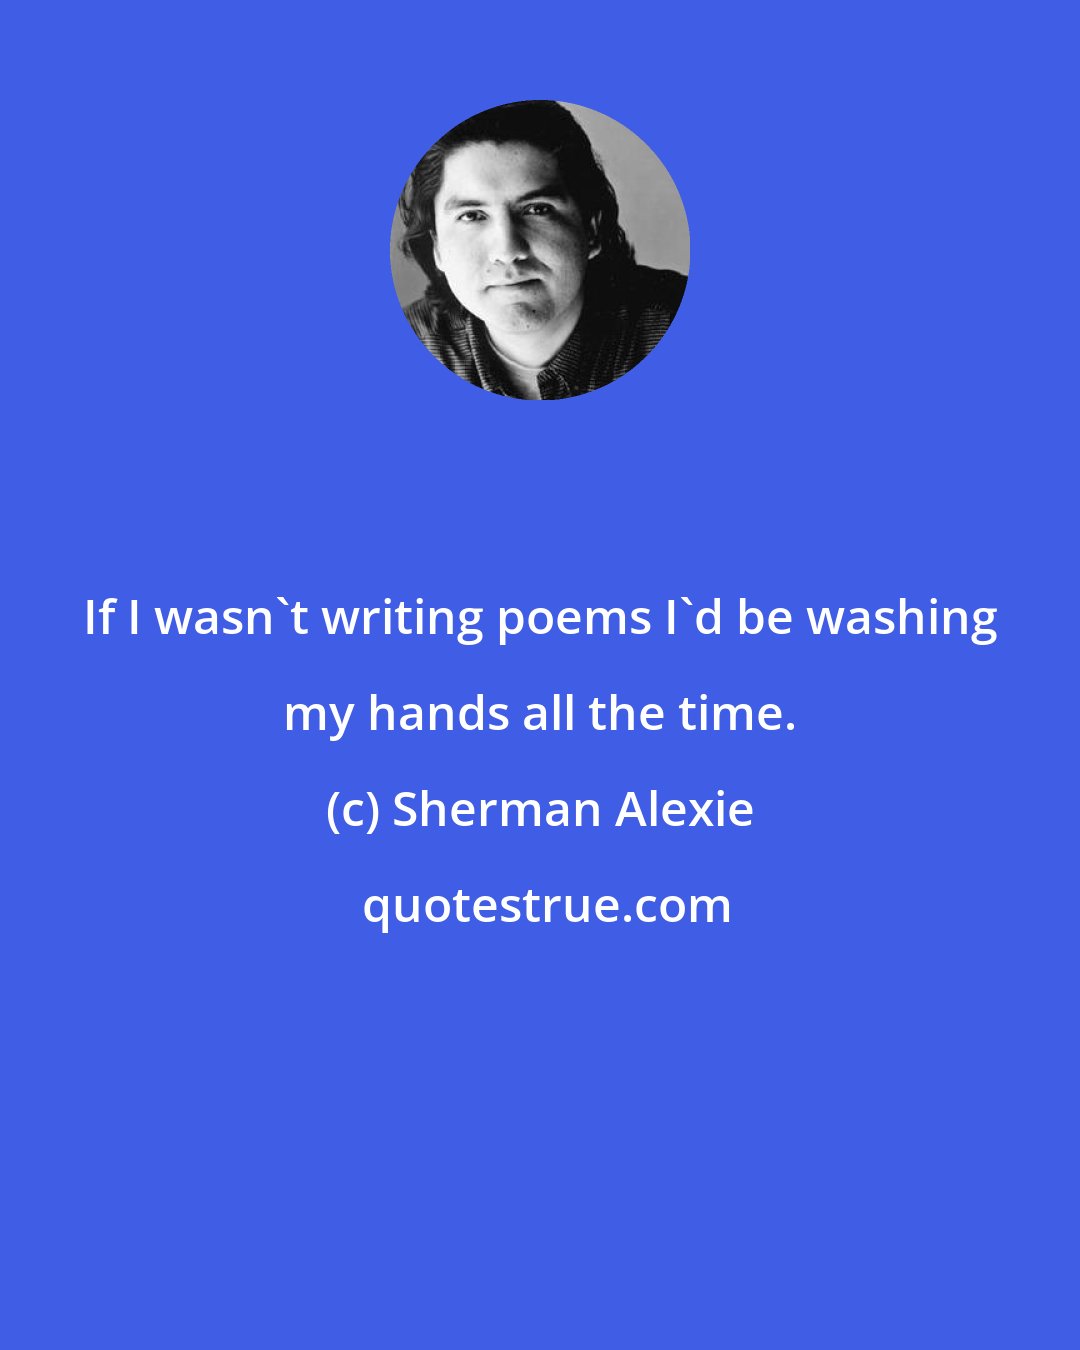 Sherman Alexie: If I wasn't writing poems I'd be washing my hands all the time.